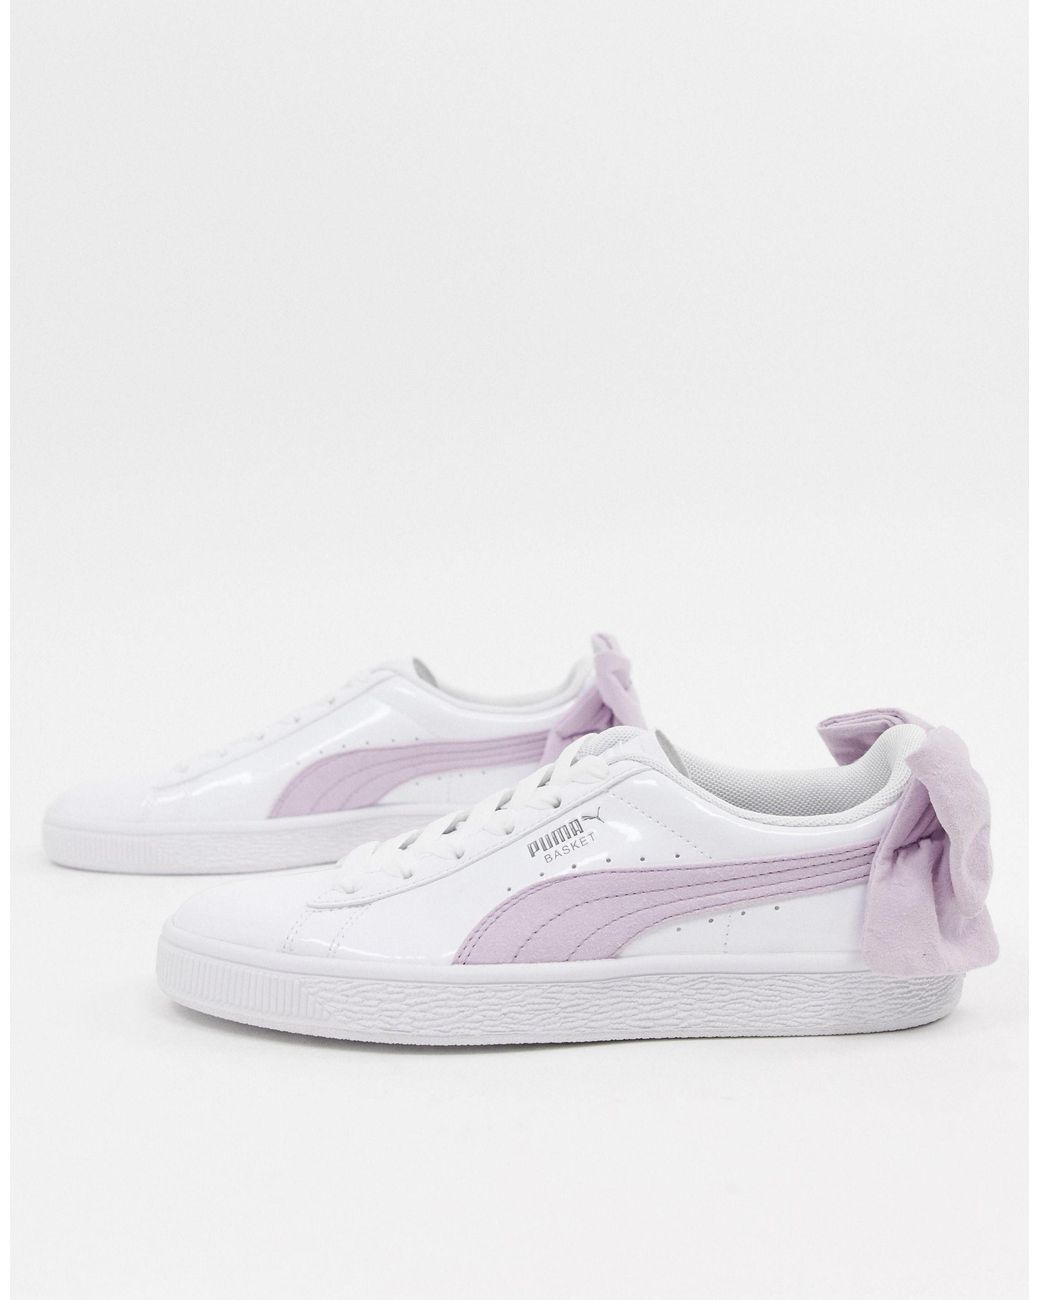 PUMA Basket Bow White Trainers in |